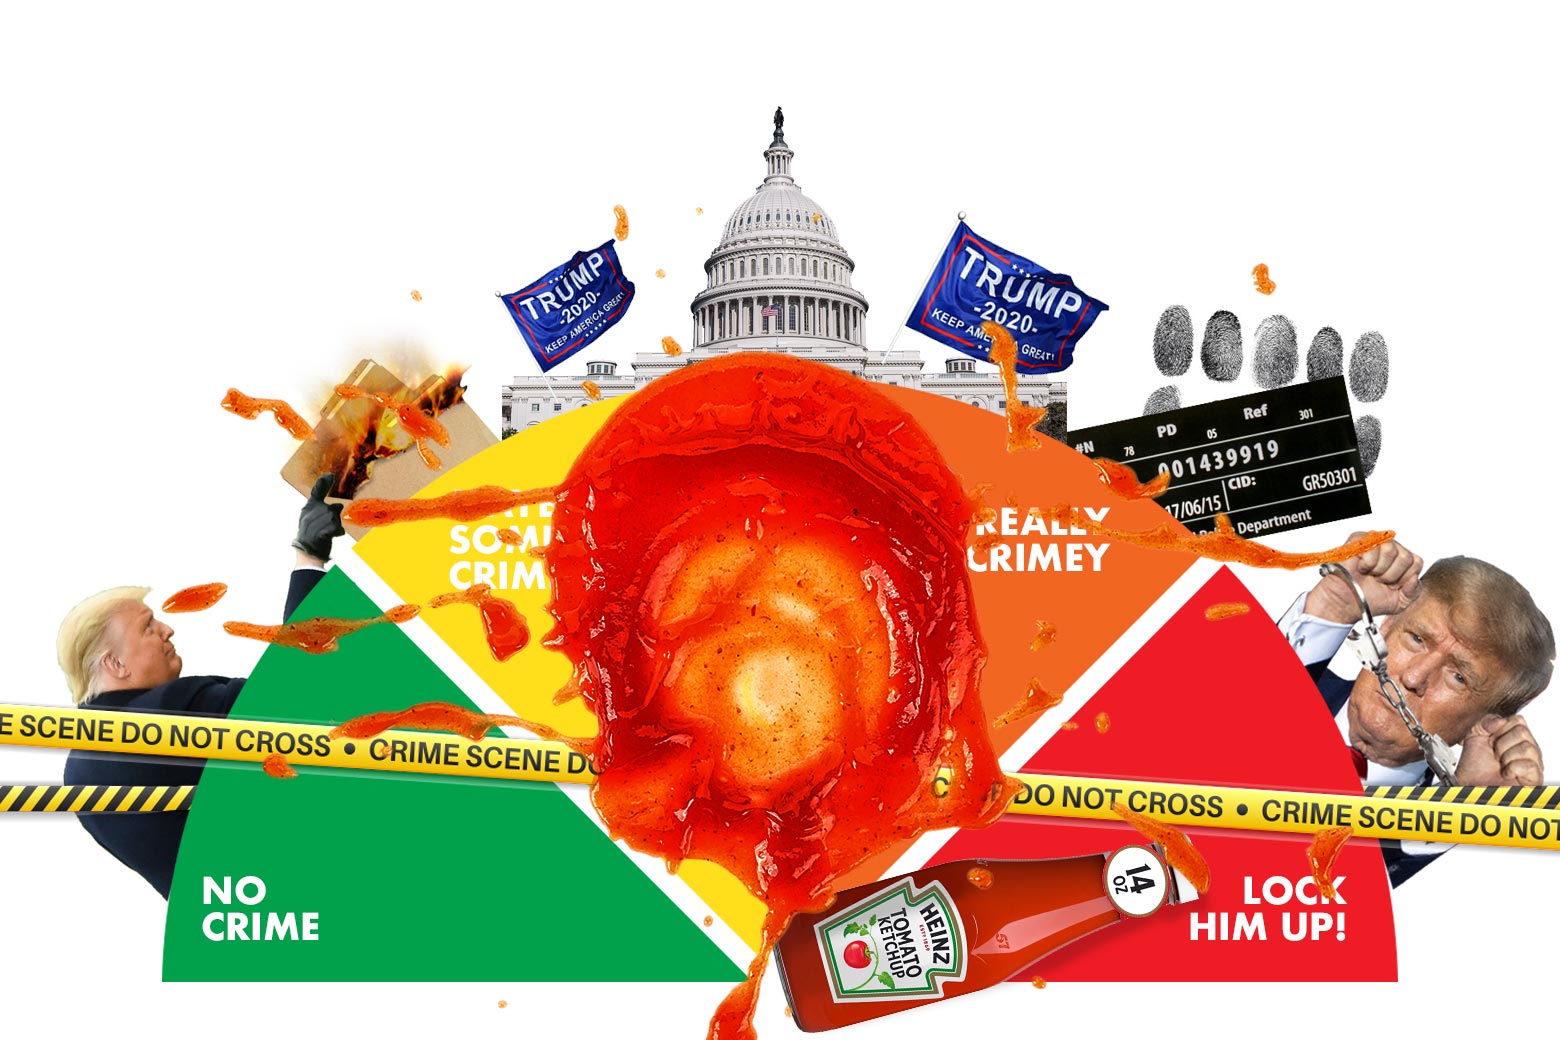 The Crime-O-Meter, its gavel indicator replaced by a bottle of ketchup, reads LOCK HIM UP. There is also a ketchup splatter on the middle of the meter.